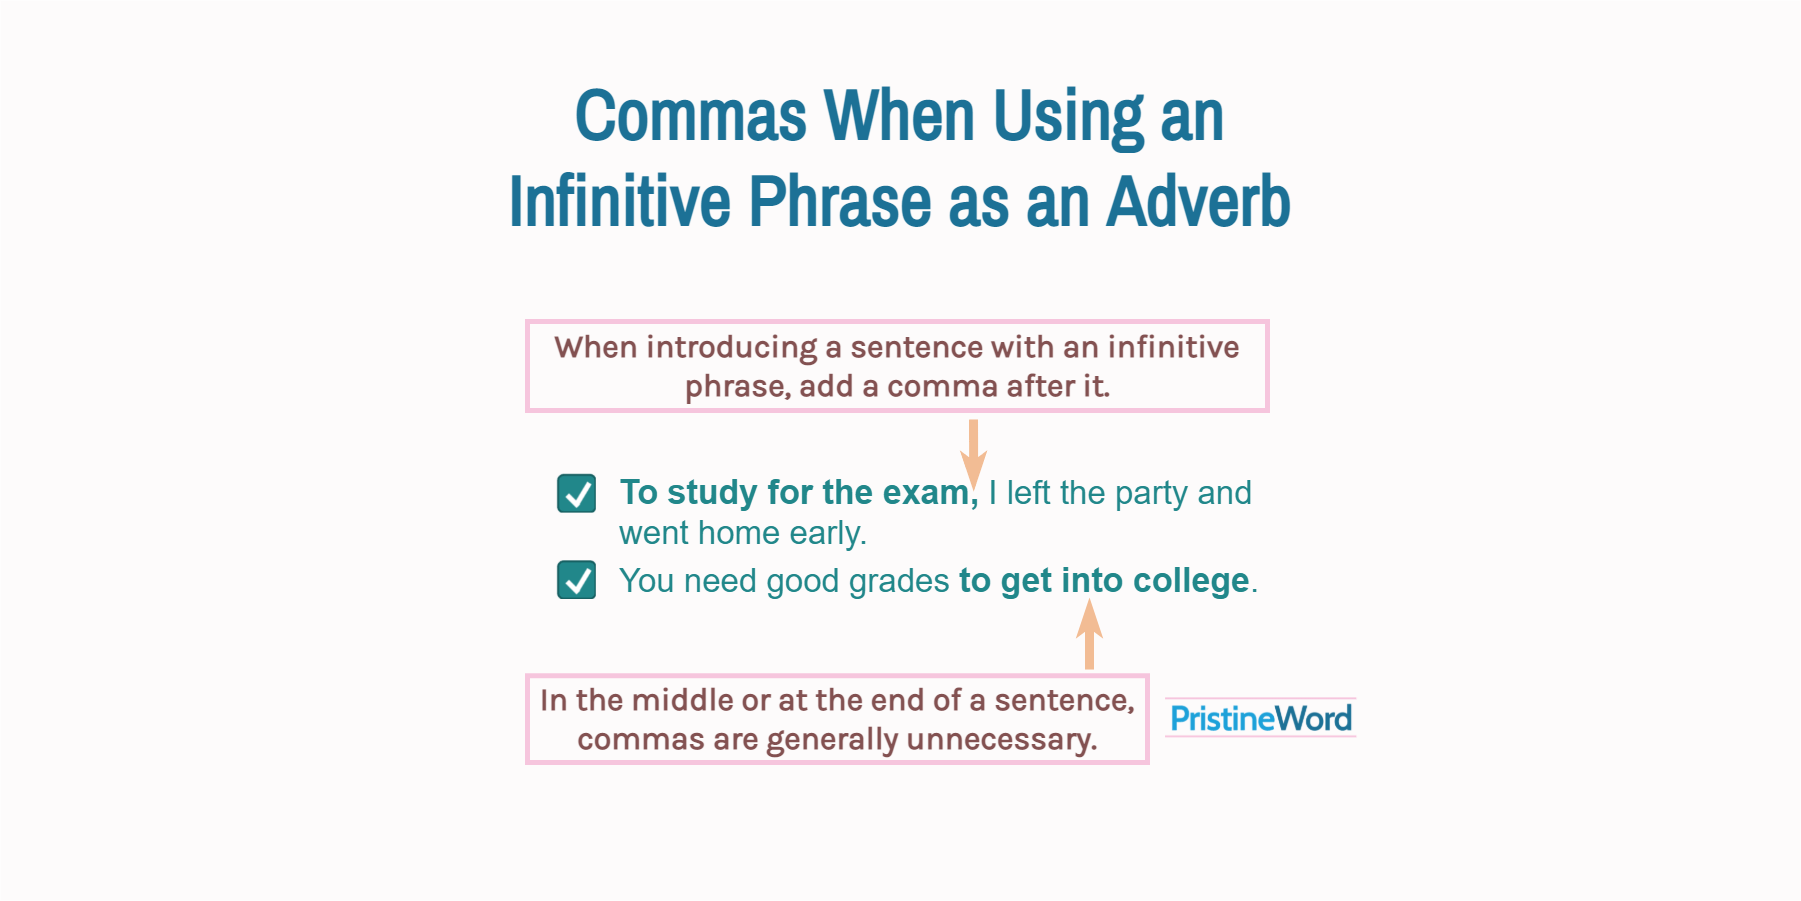 Commas with Adverbial Infinitive Phrases